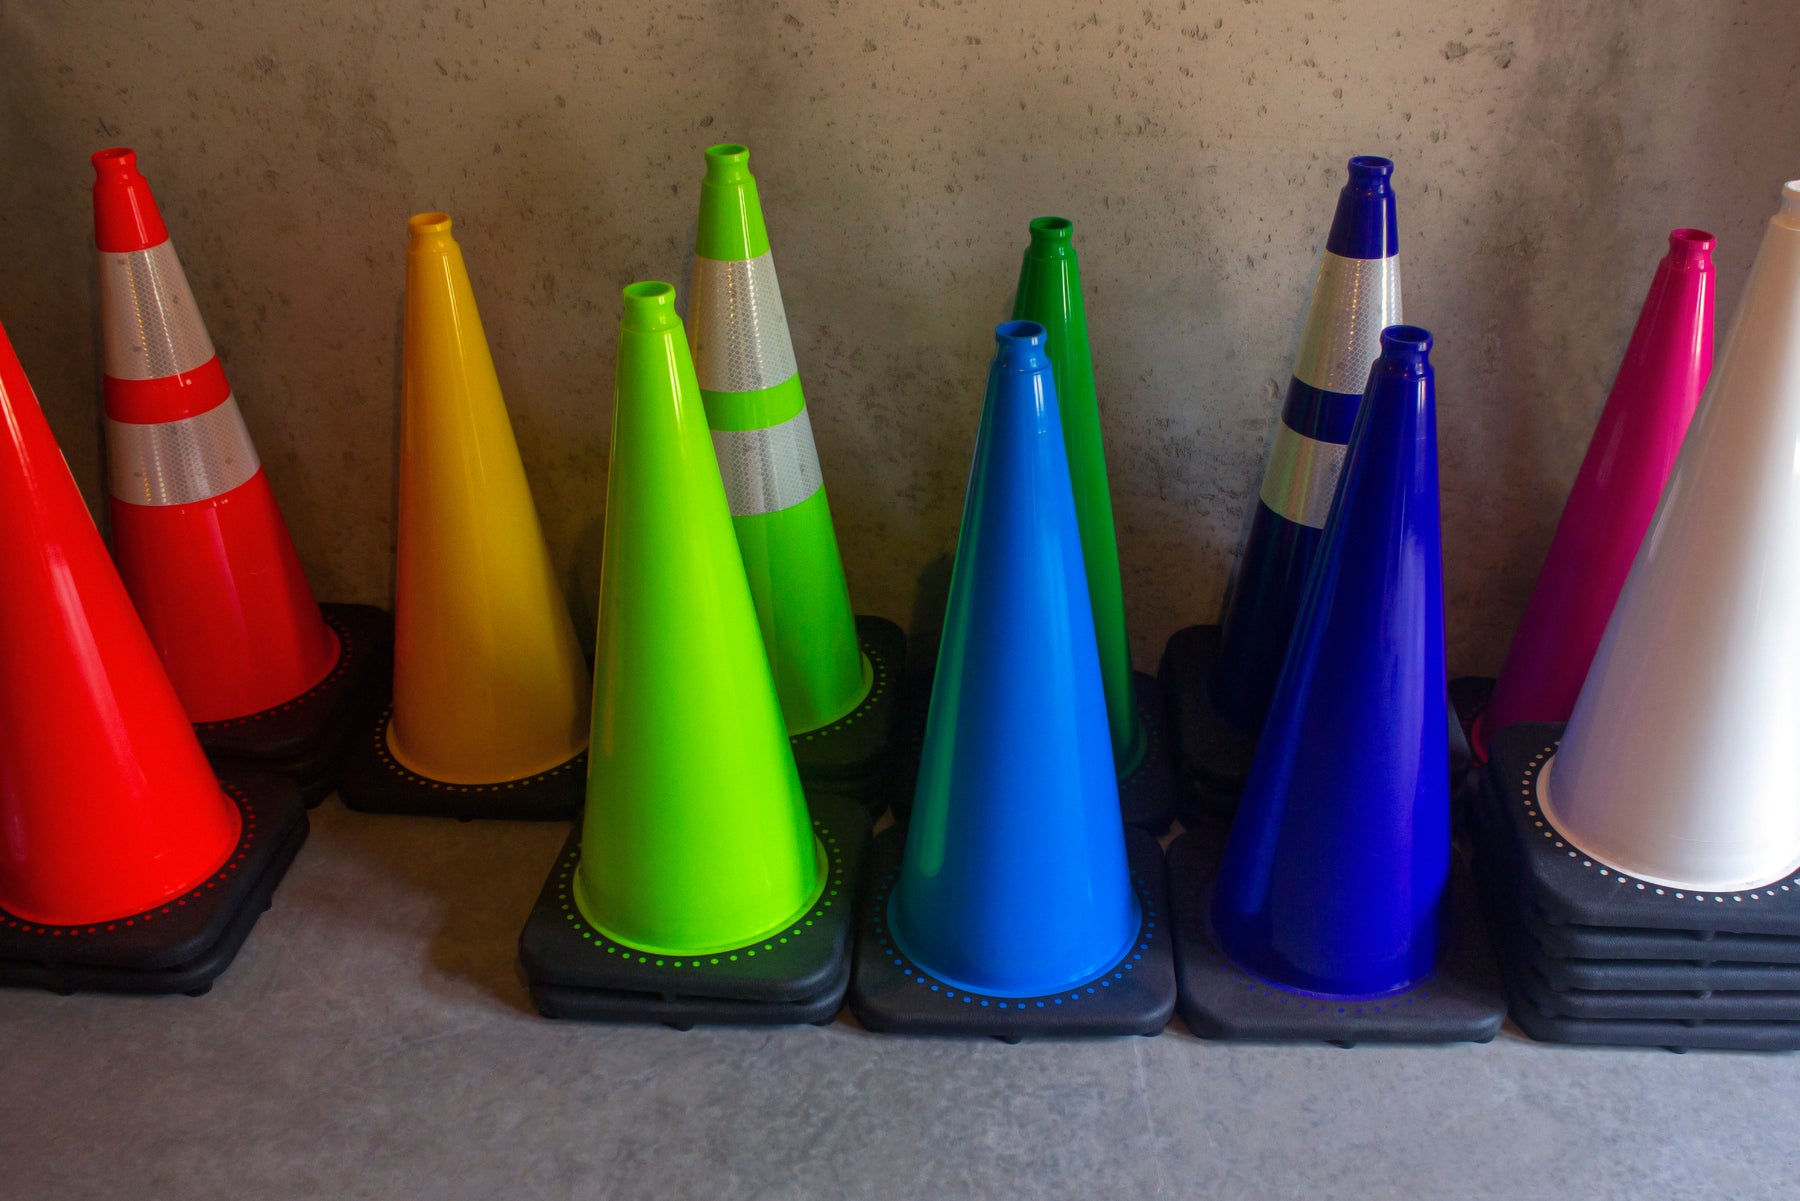 Traffic Cones - What Color Do I Use?